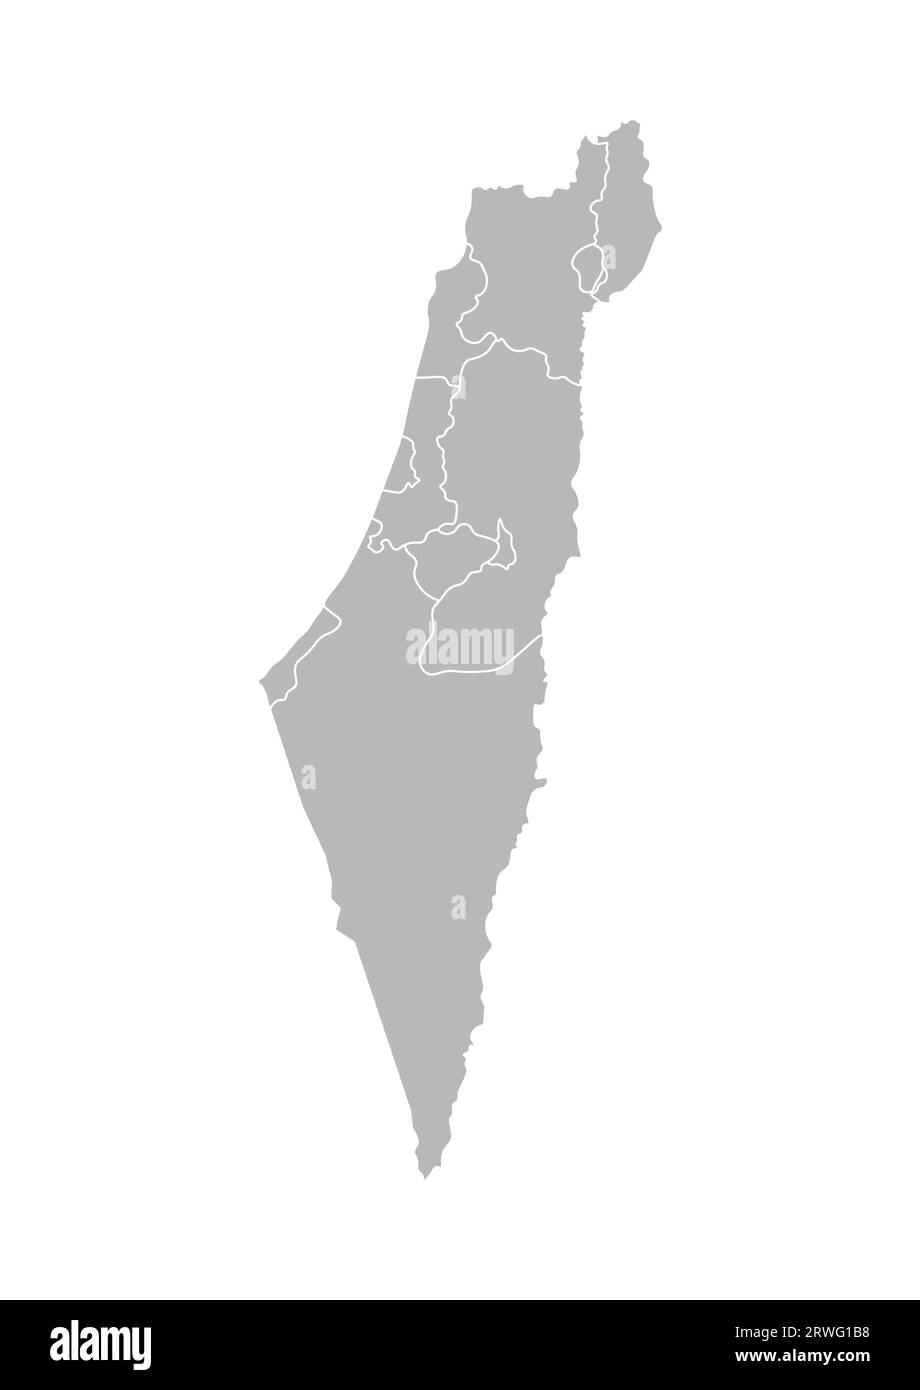 Vector isolated illustration of simplified administrative map of Israel. Borders of the districts (regions). Grey silhouettes. White outline. Stock Vector